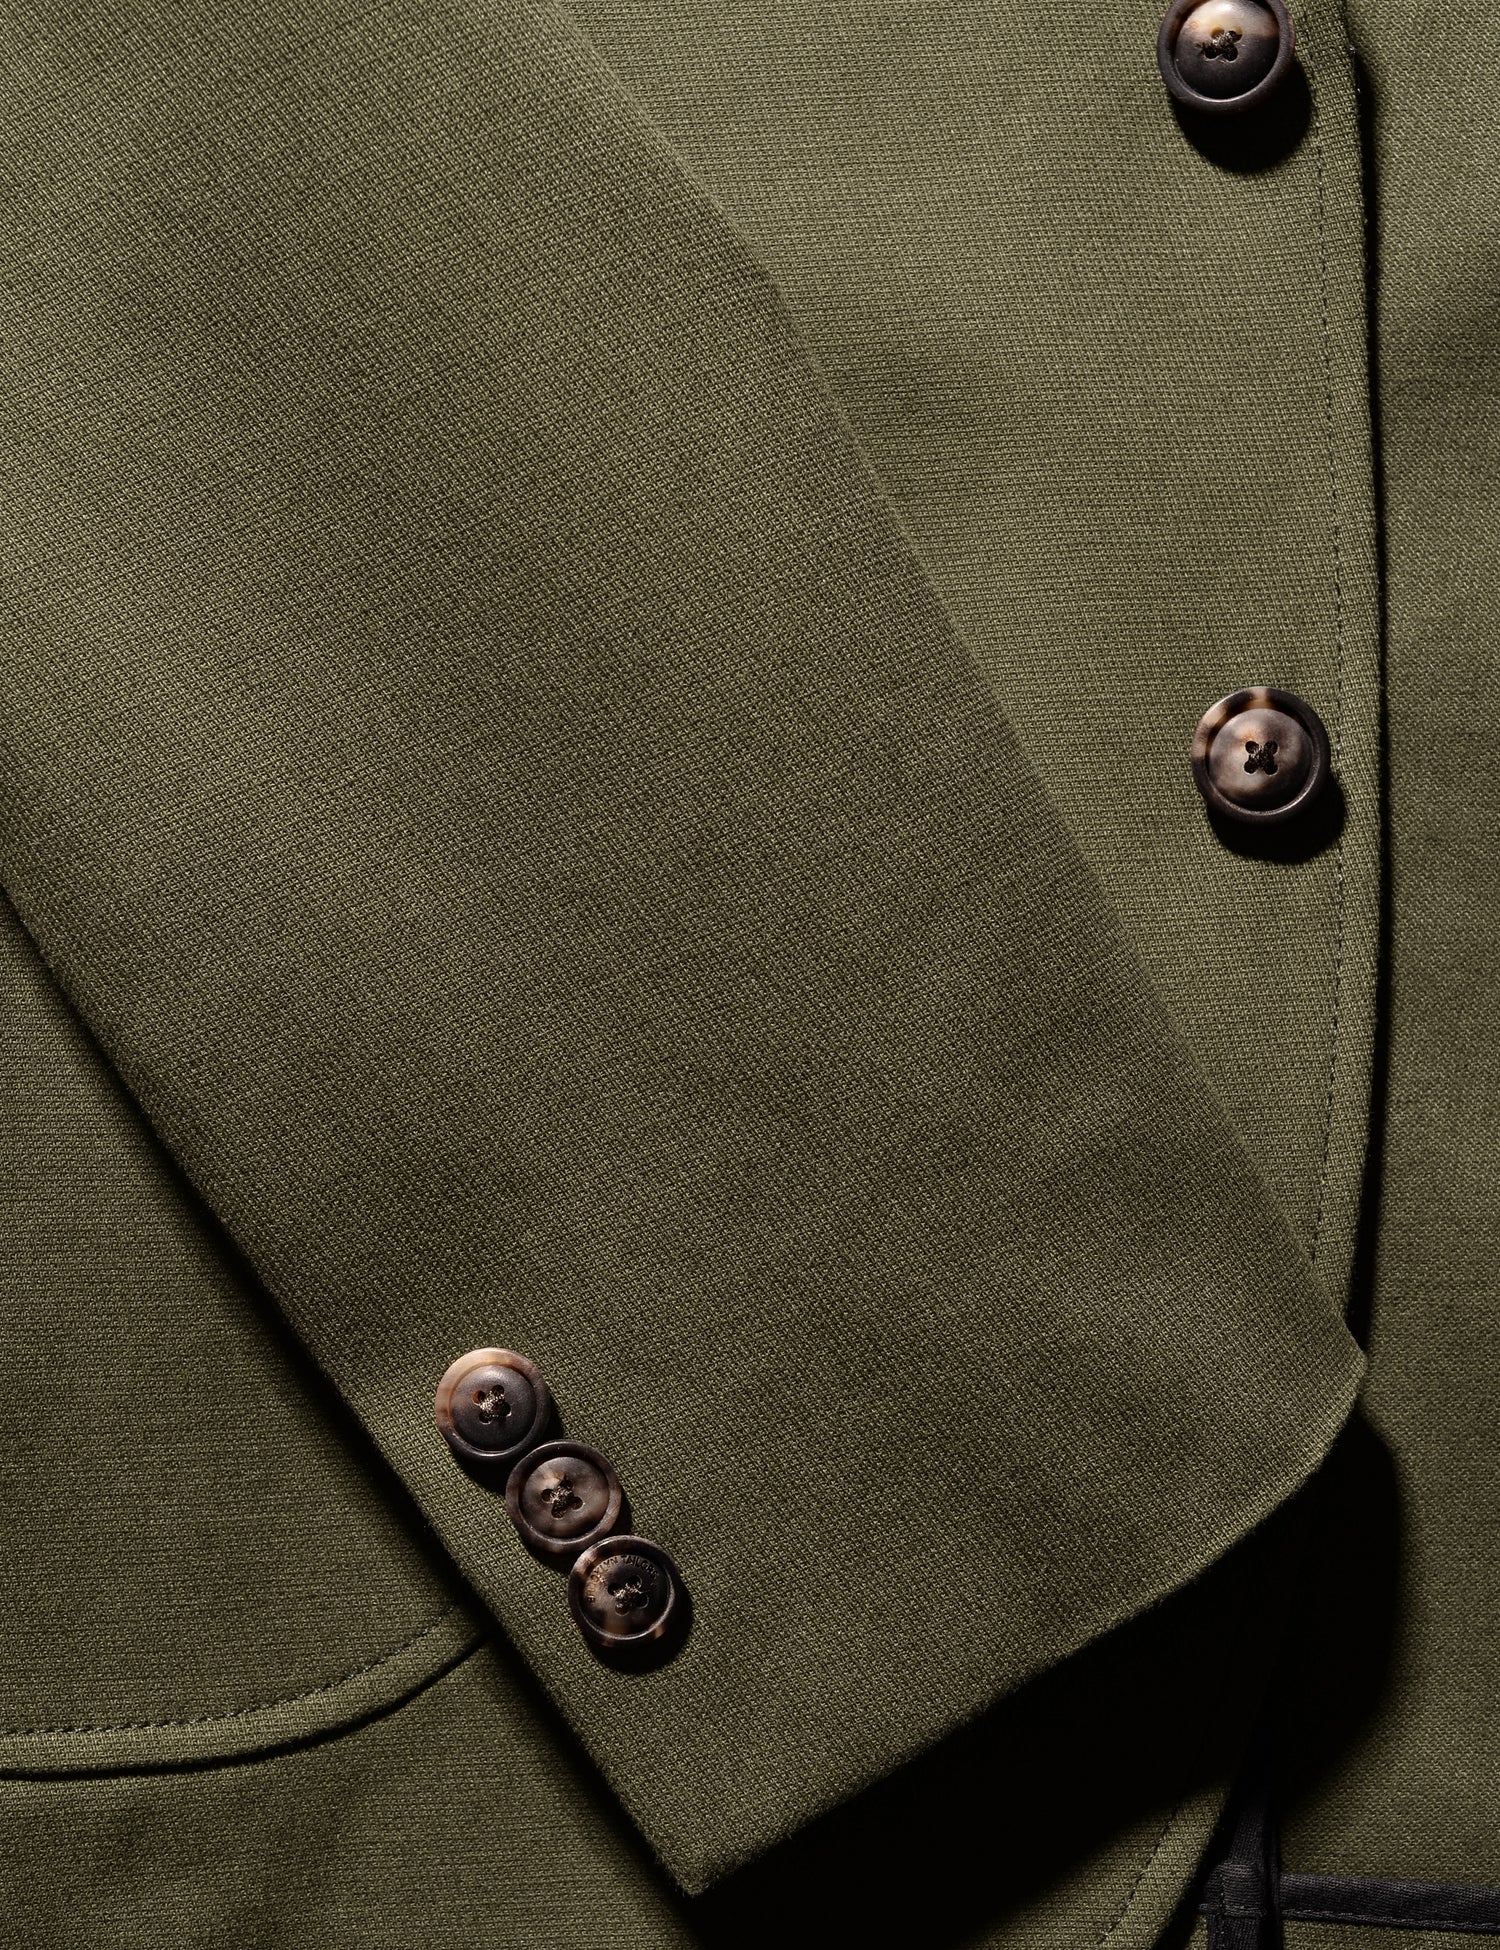 Detail shot showing cuff, patch pocket, buttons, and fabric texture on Brooklyn Tailors BKT35 Unstructured Jacket in Cavalry Twill - Olive